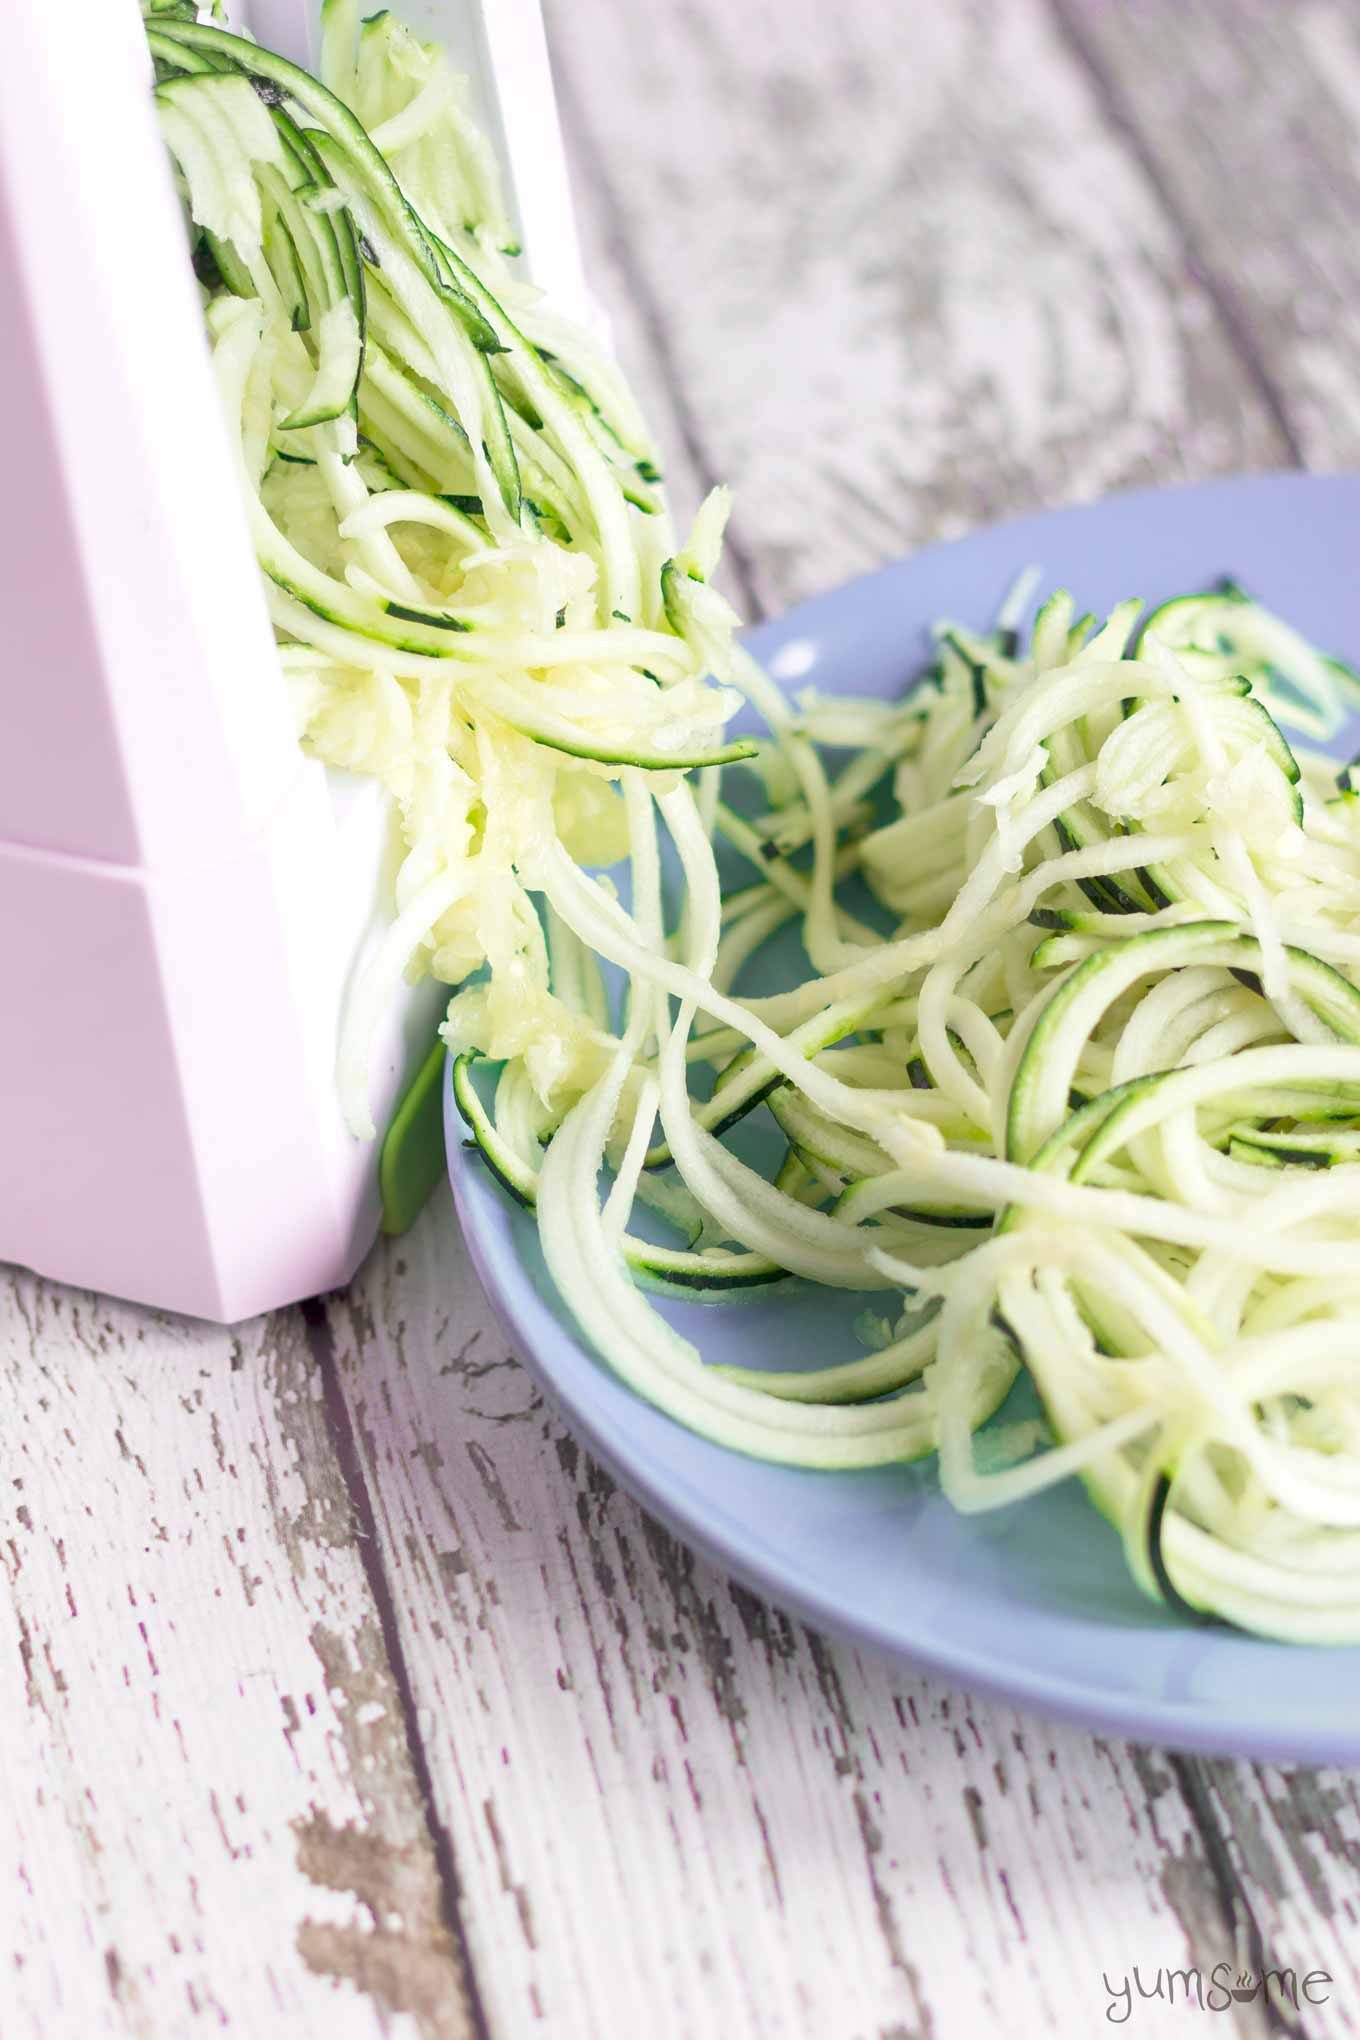 Spiralised zucchini noodles | yumsome.com